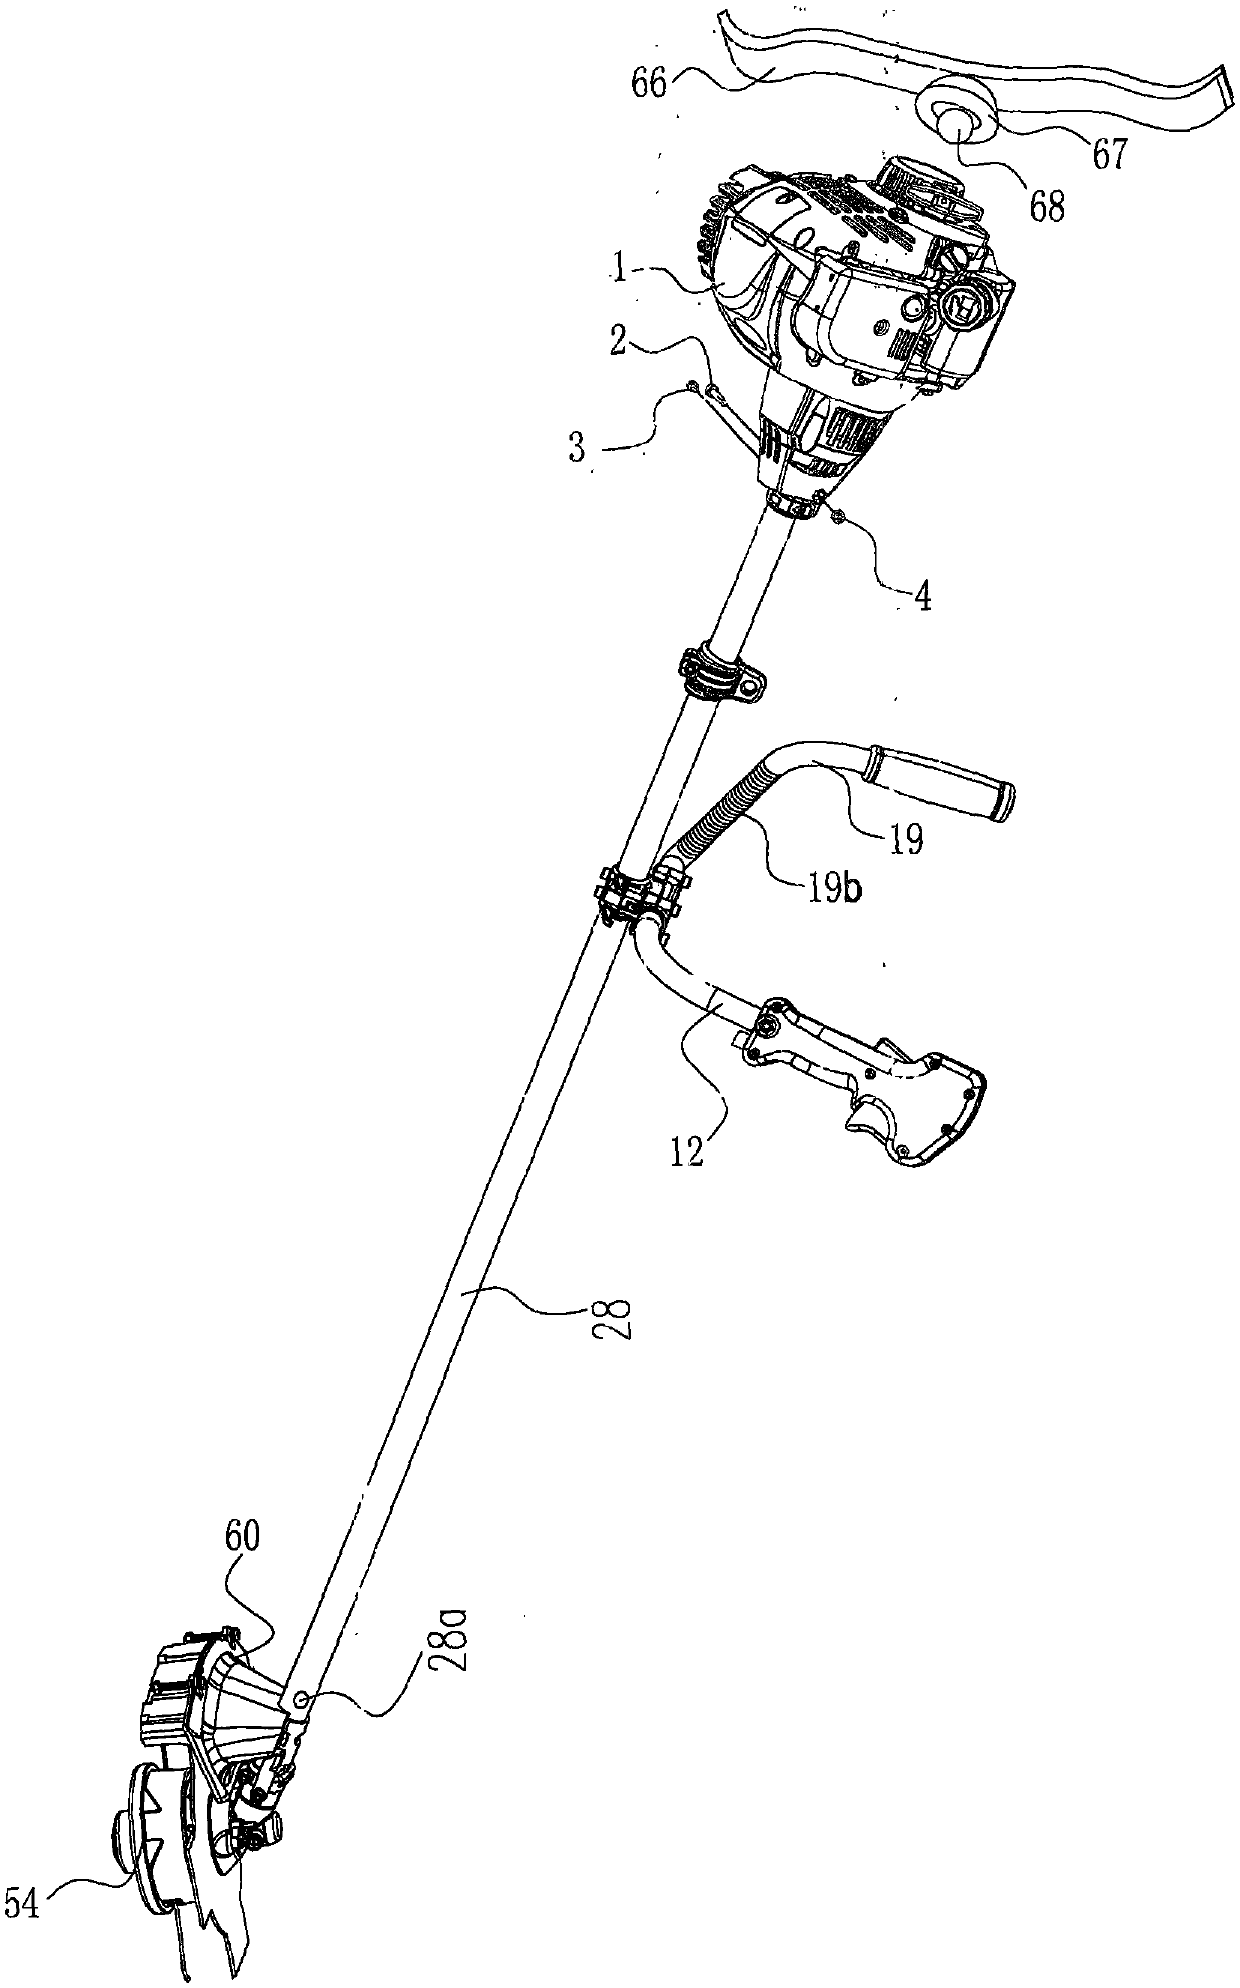 Brush cutter with single-cylinder half-balance and parabola wing-shaped blade gasoline engine